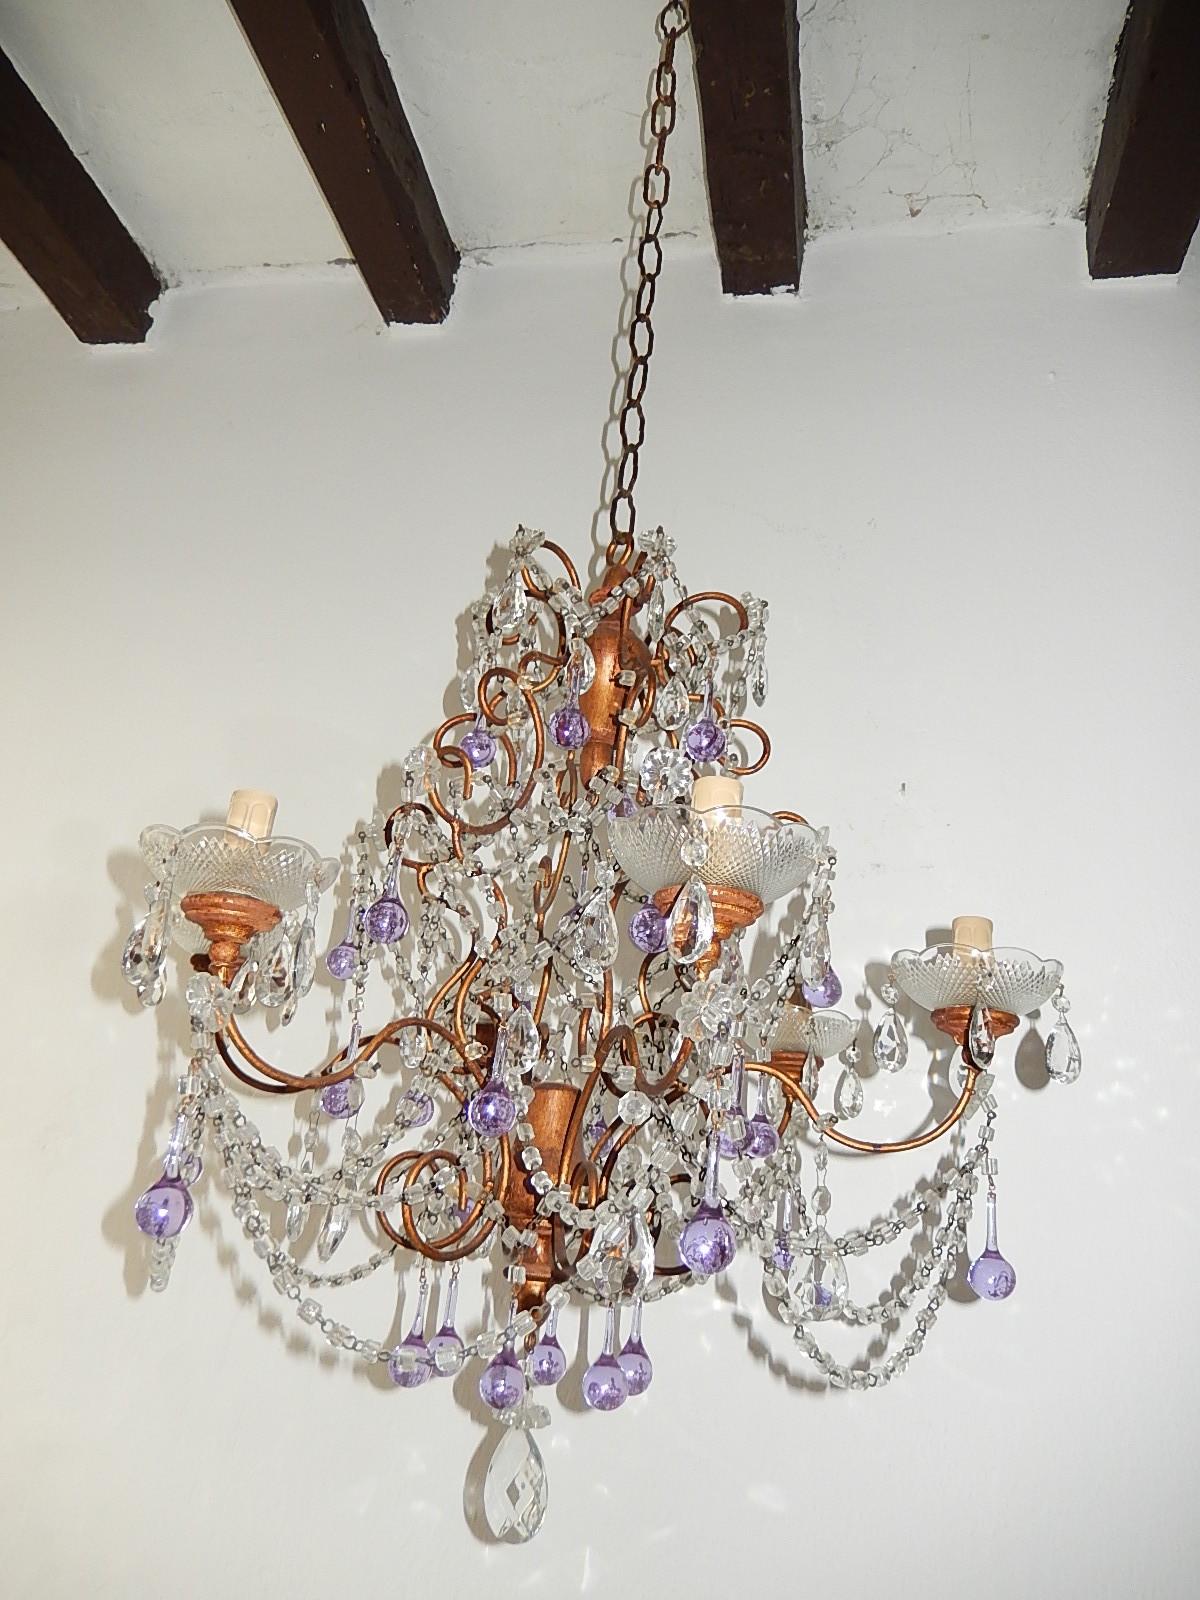 Rewired and ready to hang. Housing six-light, sitting in crystal bobeches, dripping with crystal prisms. Giltwood on top, centre and bottom with florets and macaroni beading swags. Also adorning rare purple Murano drops. Adding another 12 inches of